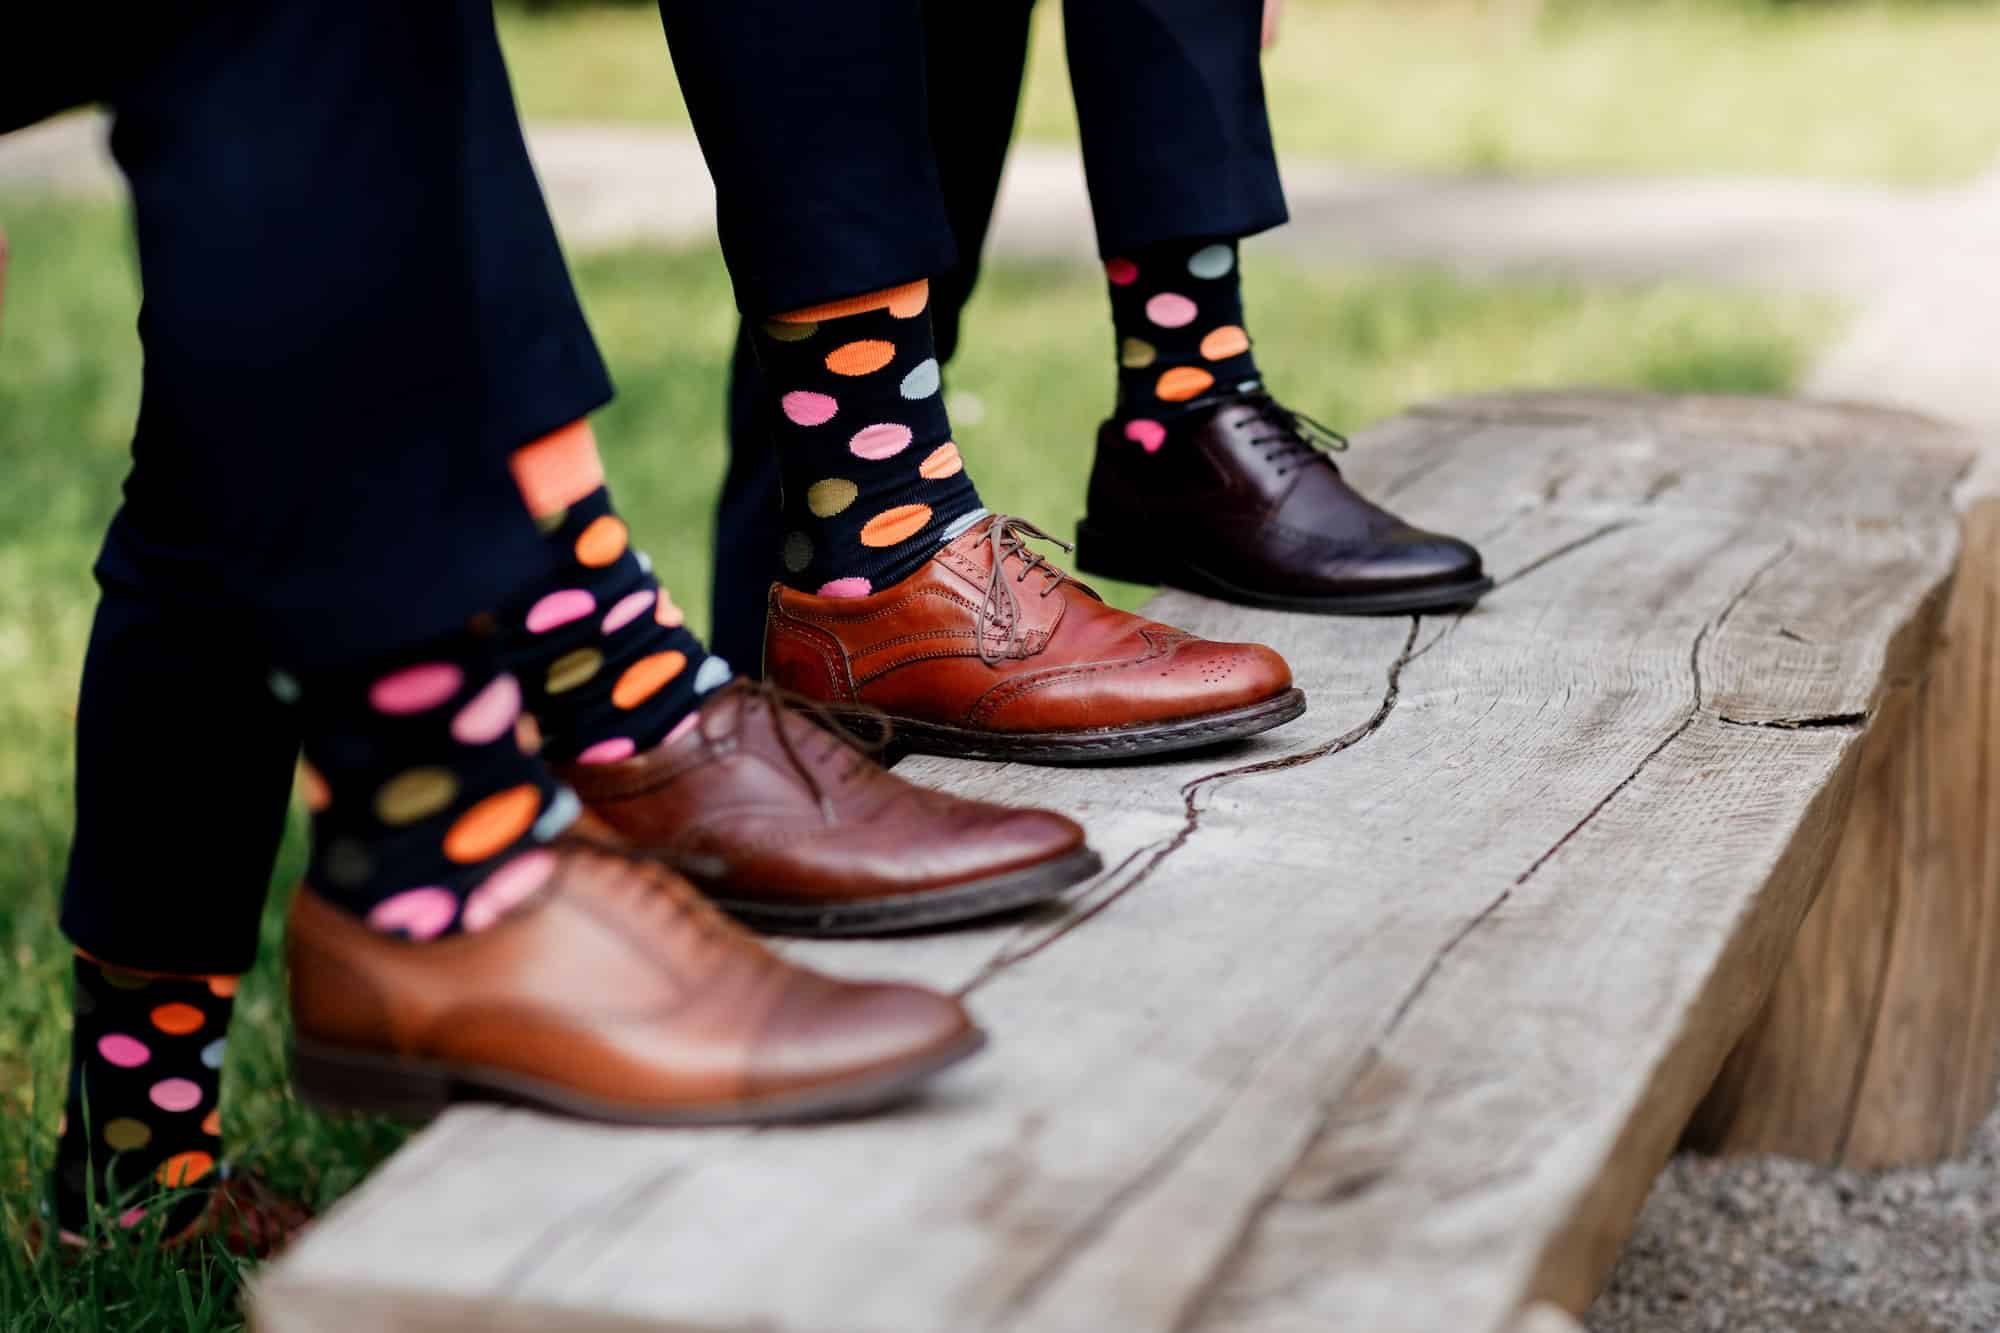 Feet of the groom and friends of the groom with funny colored socks. Men in colorful socks